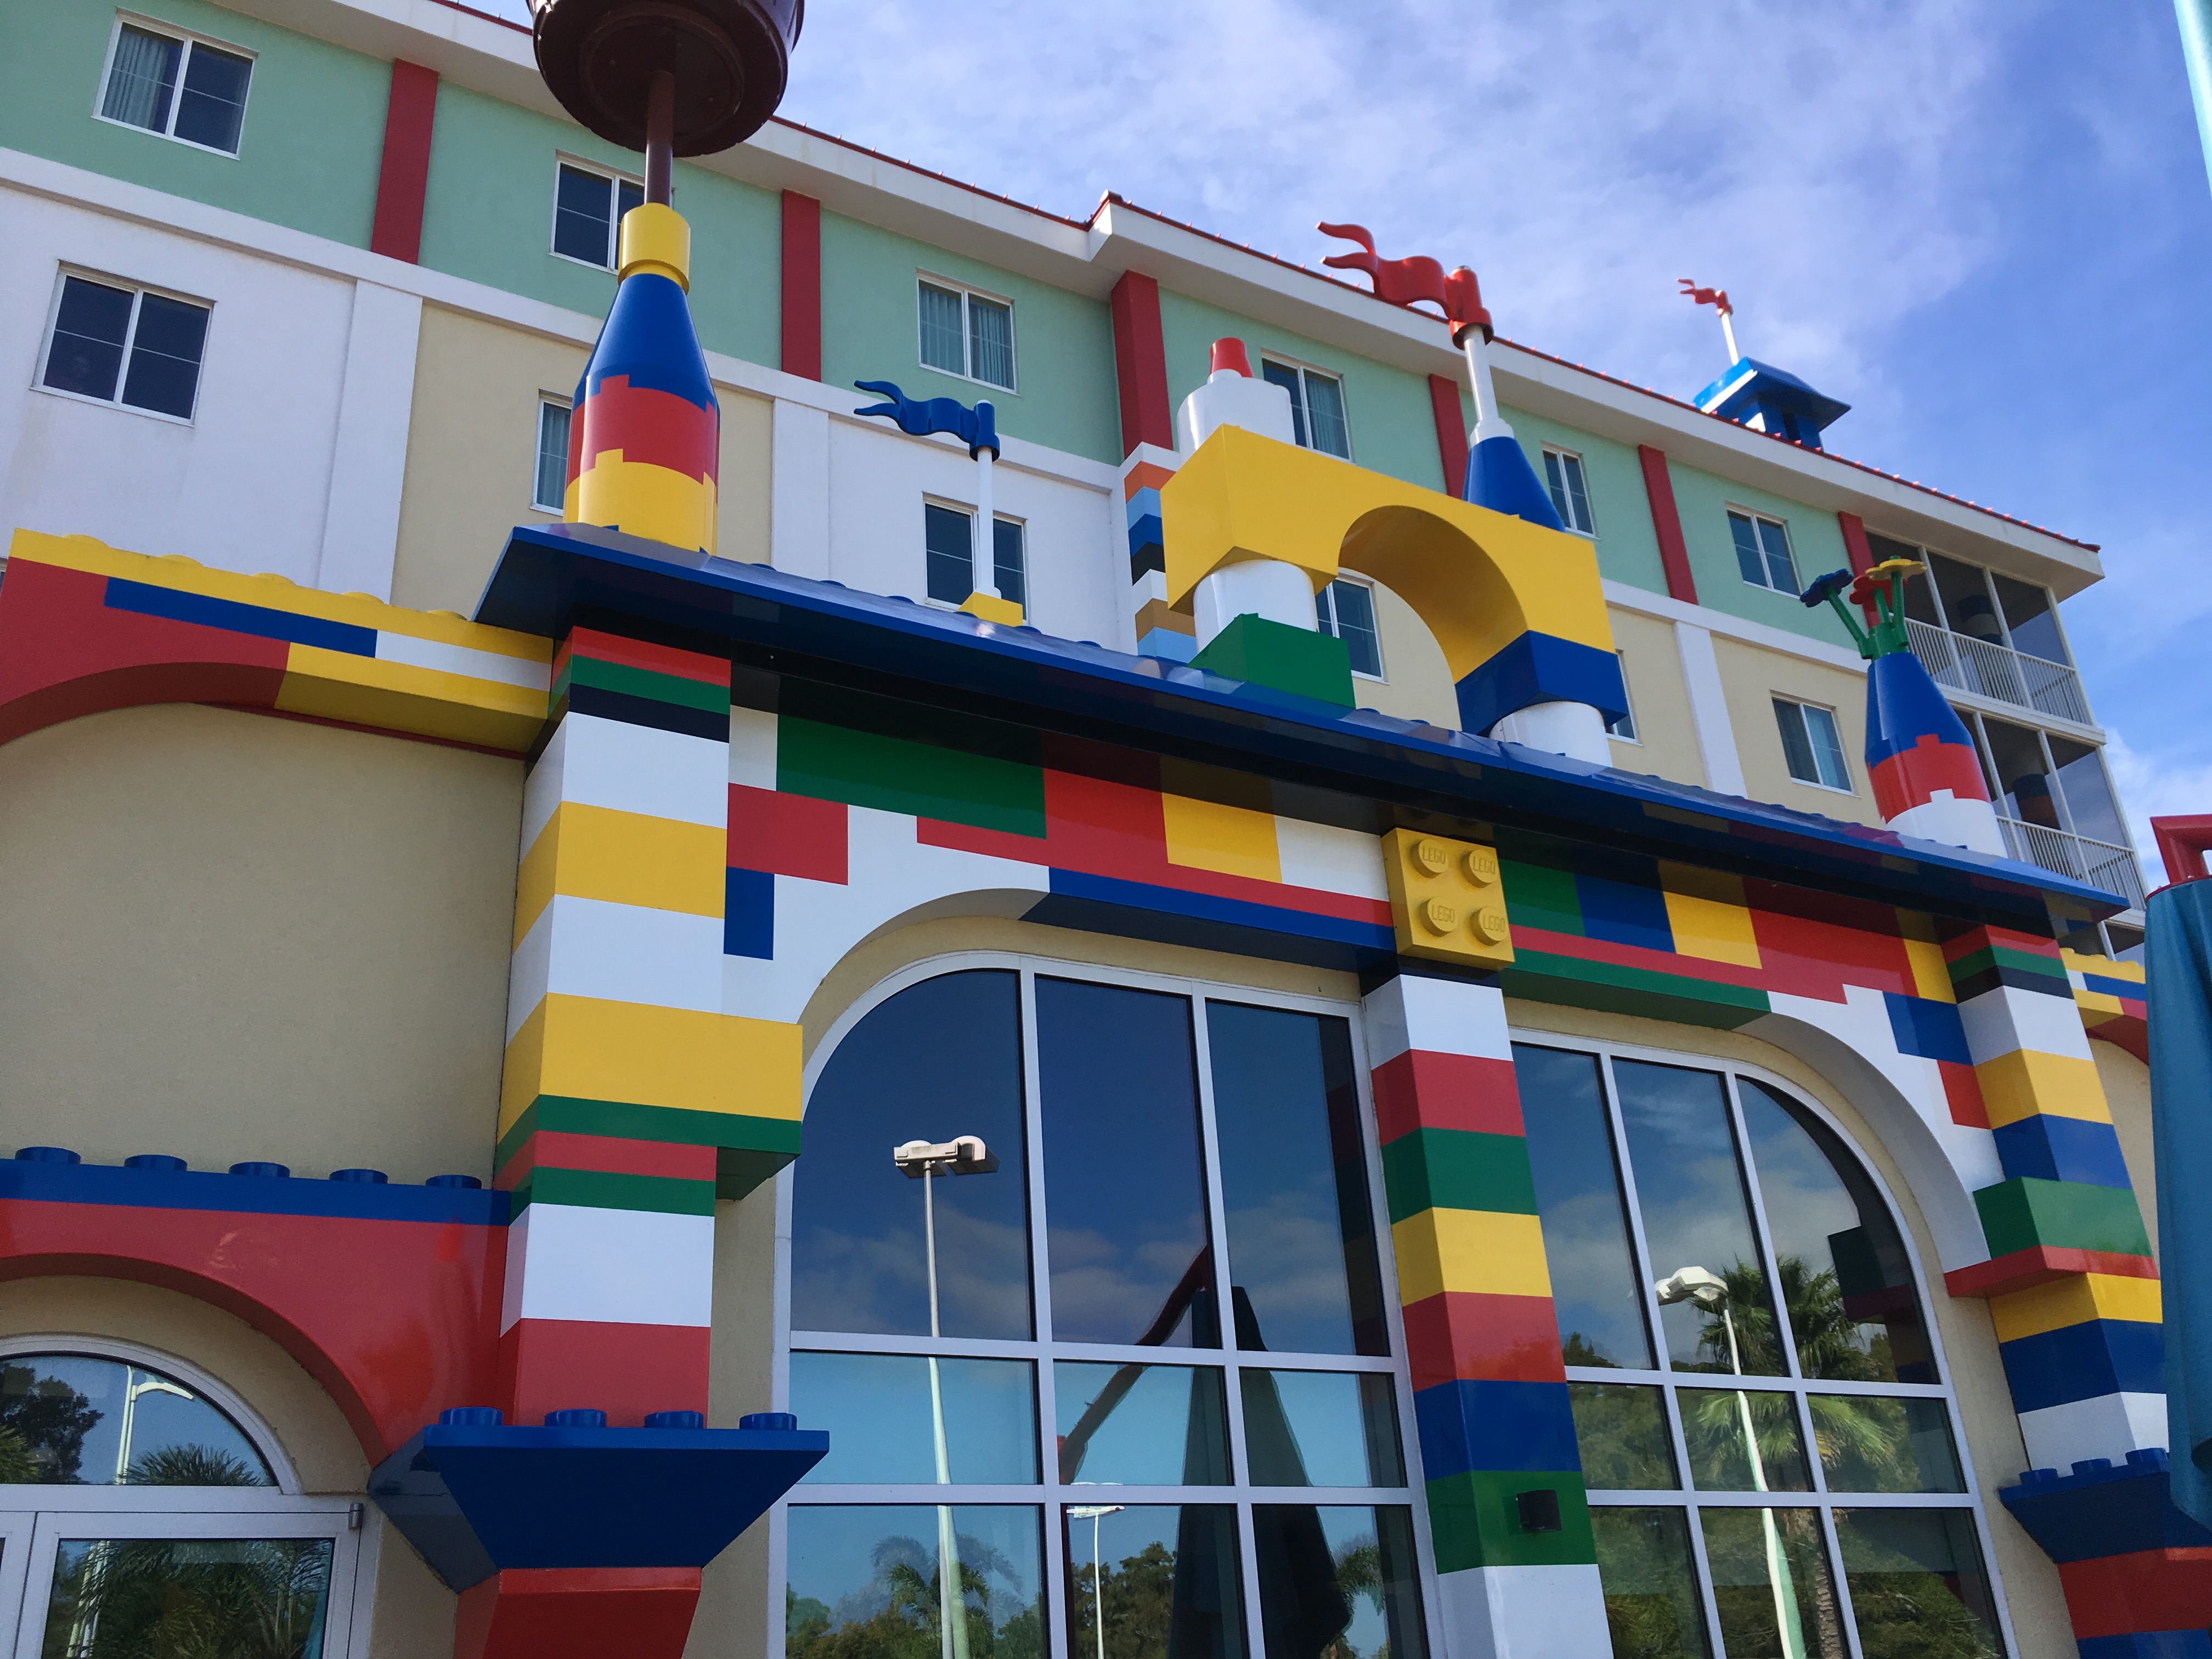 5 Reasons Everyone Needs to Stay at the Legoland Hotel